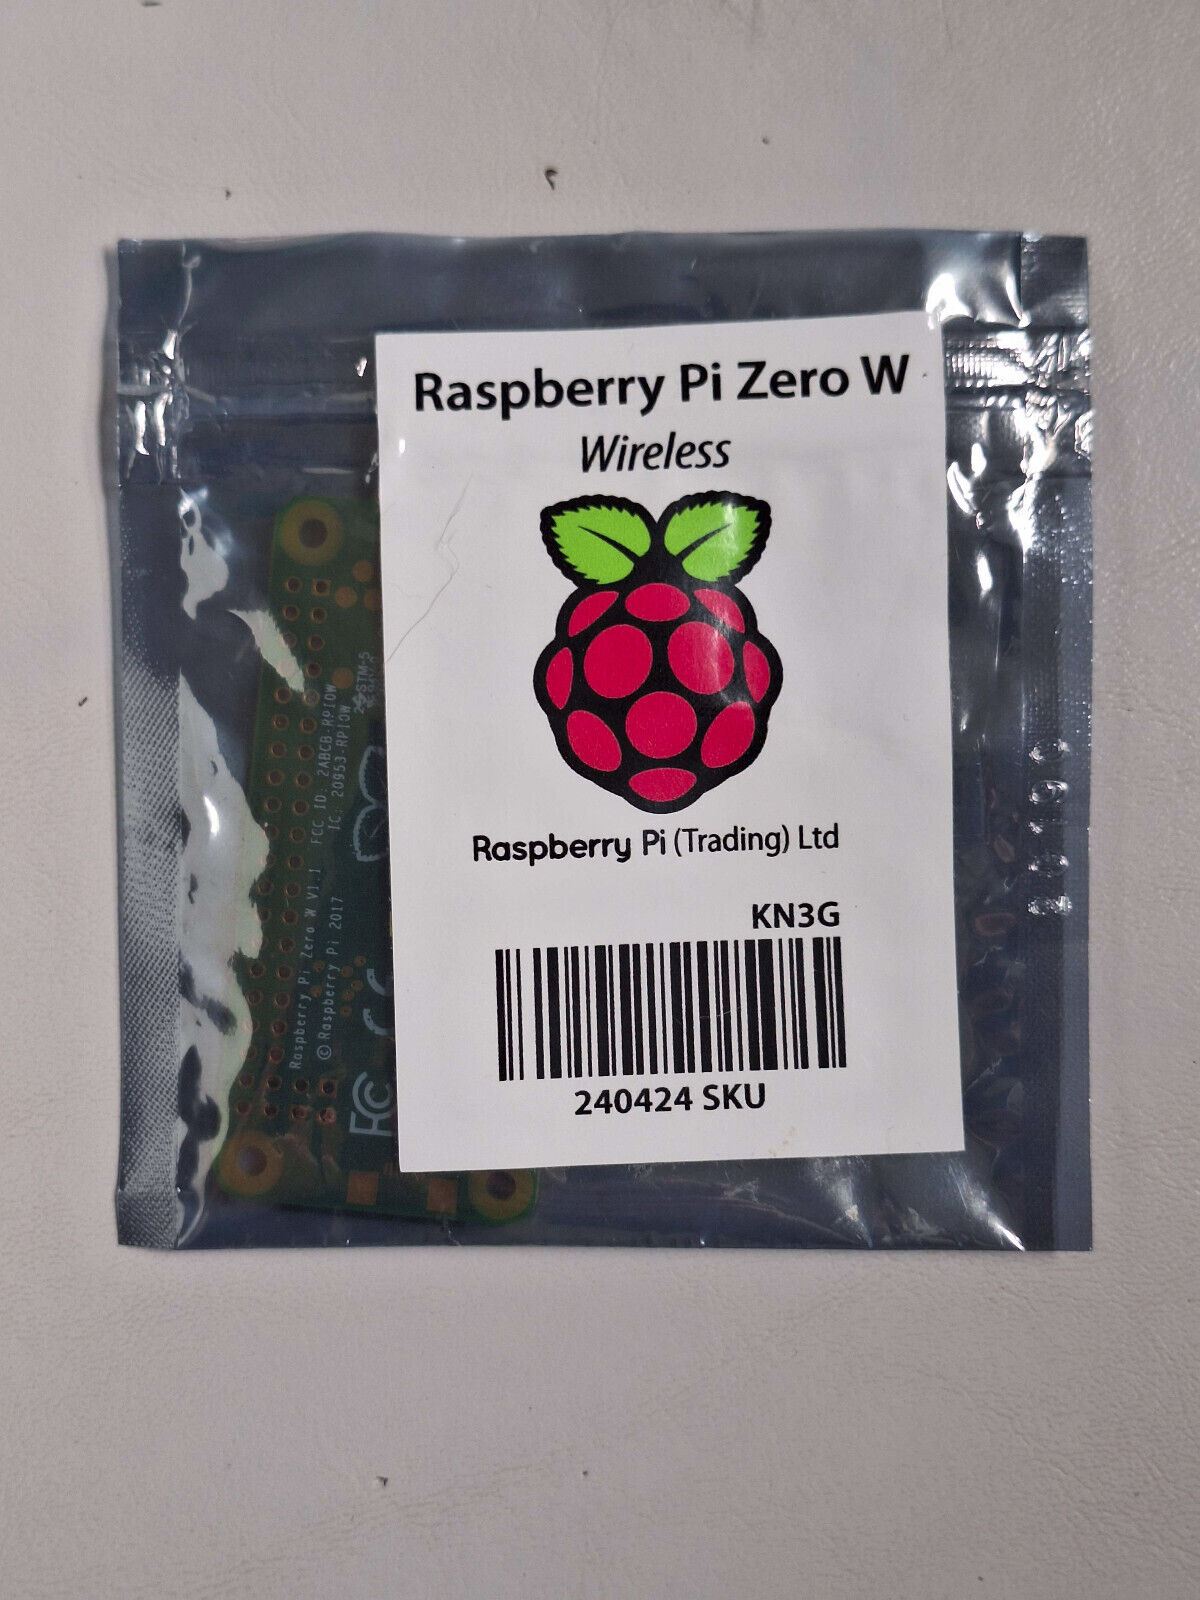 Raspberry Pi Zero W v1.1 (Tested, Open Box, Limited Stock of 3 Total)